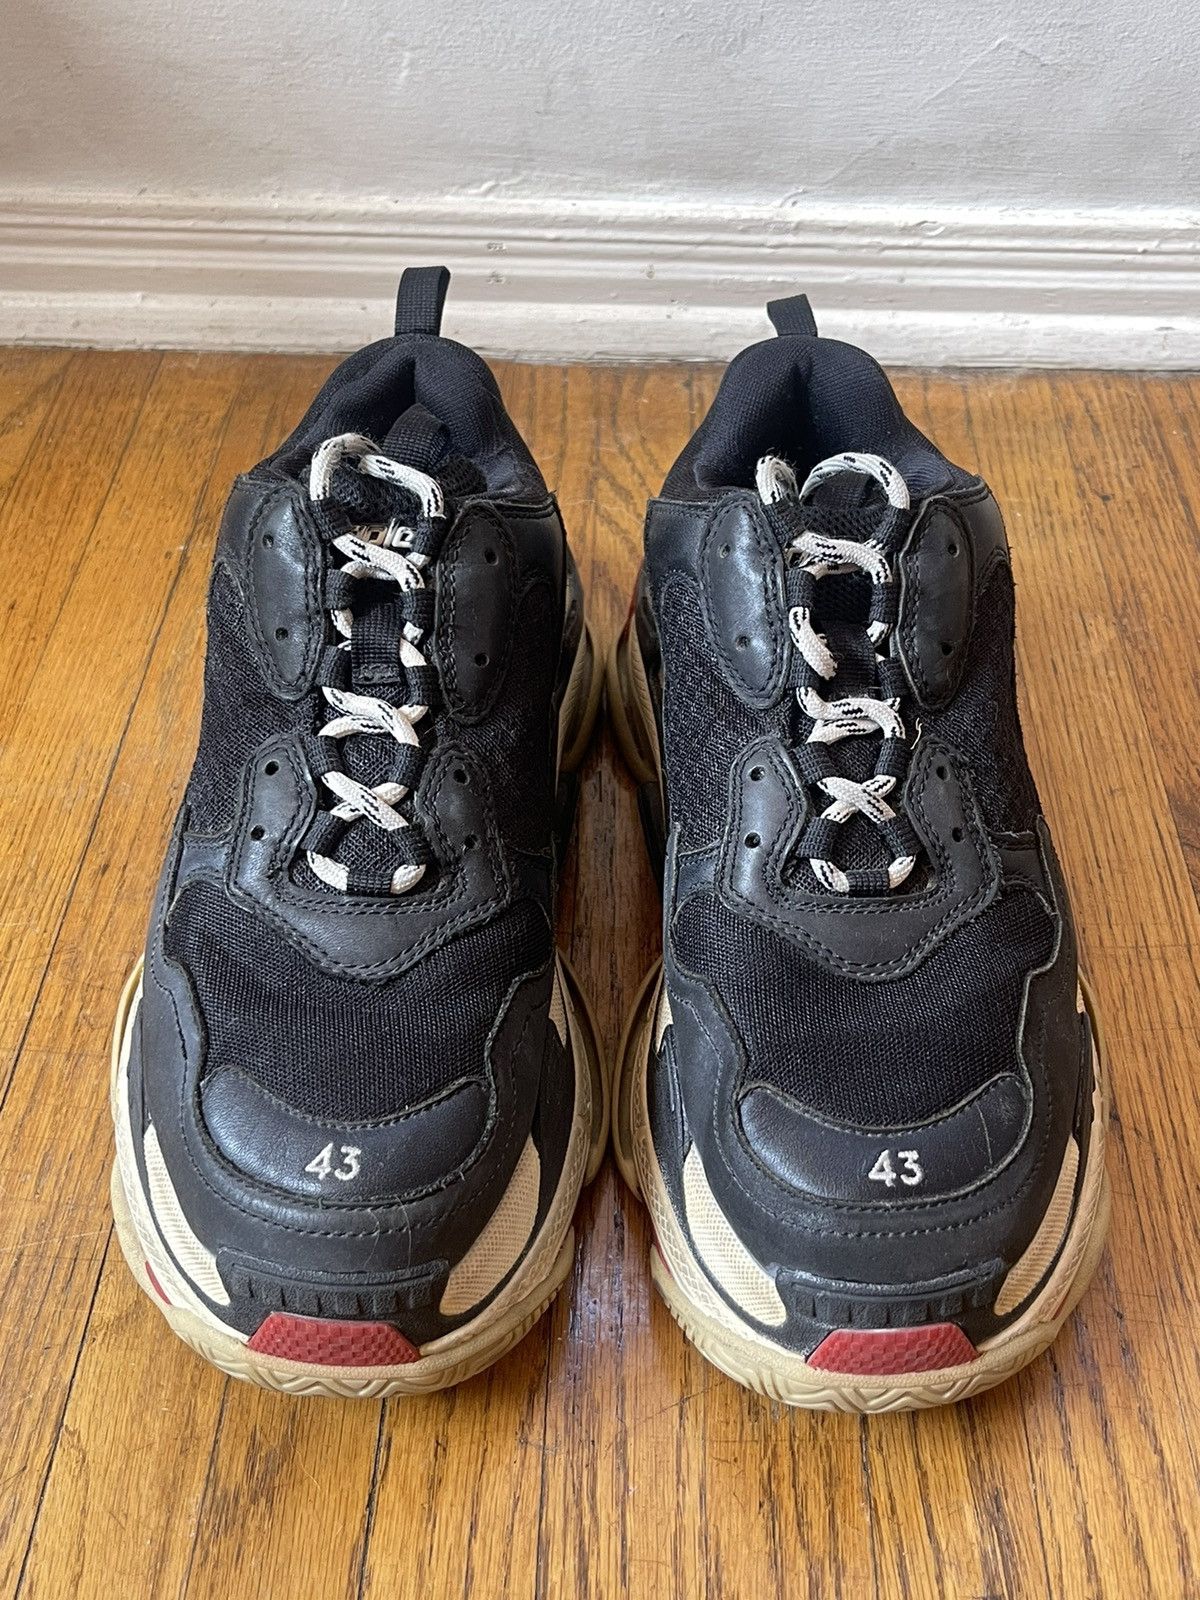 Does this still exist? DS BALENCIAGA LEGO Triple S Made in Italy